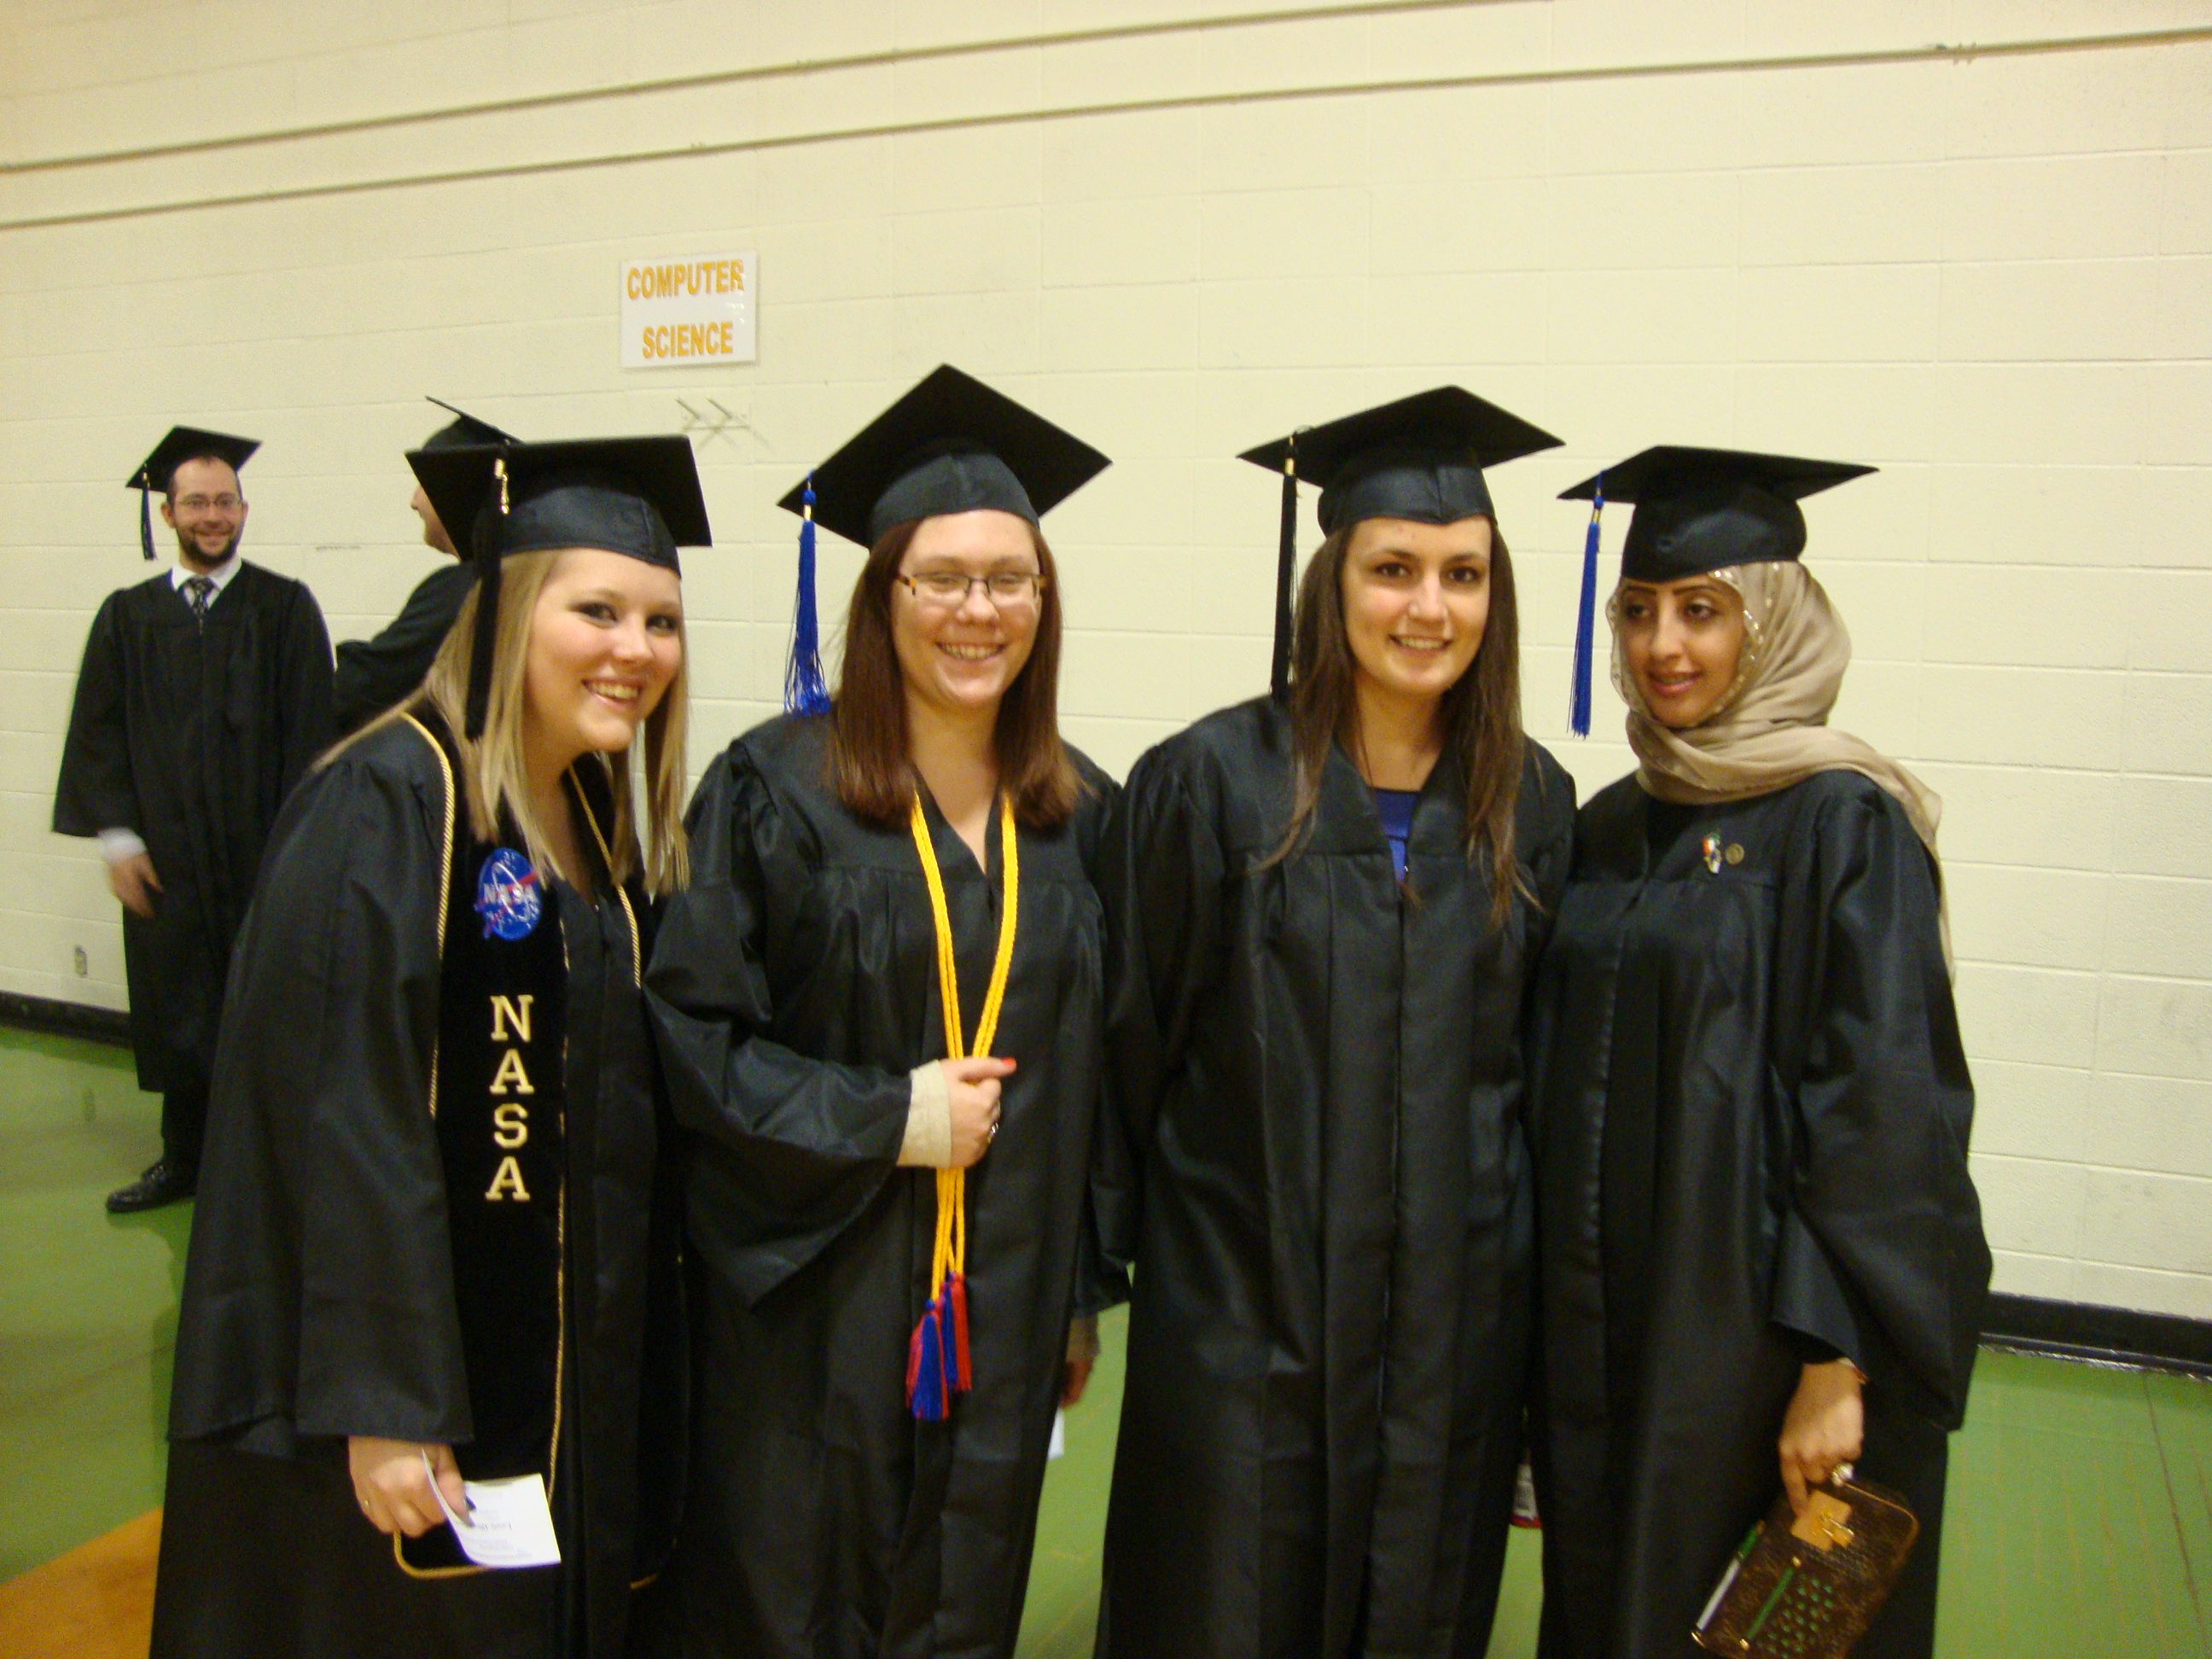 Students in caps and gowns for graduation